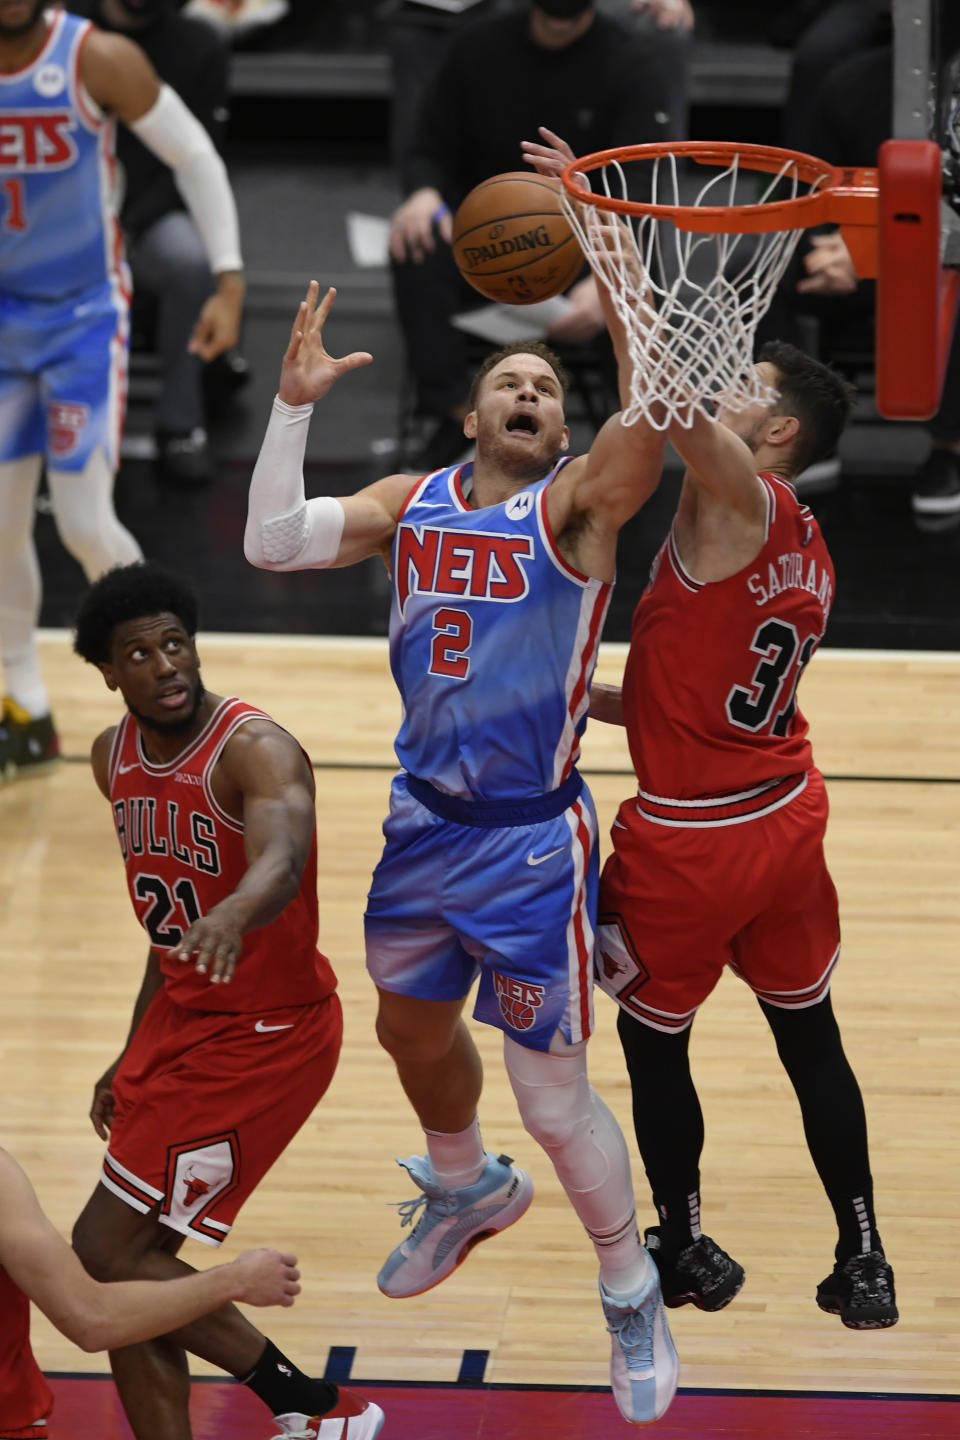 Brooklyn Nets' Blake Griffin (2) goes up for a rebound against Chicago Bulls' Thaddeus Young (21) and Tomas Satoransky (31) of The Czech Republic during the second half of an NBA basketball game Sunday, April 4, 2021, in Chicago. (AP Photo/Paul Beaty)